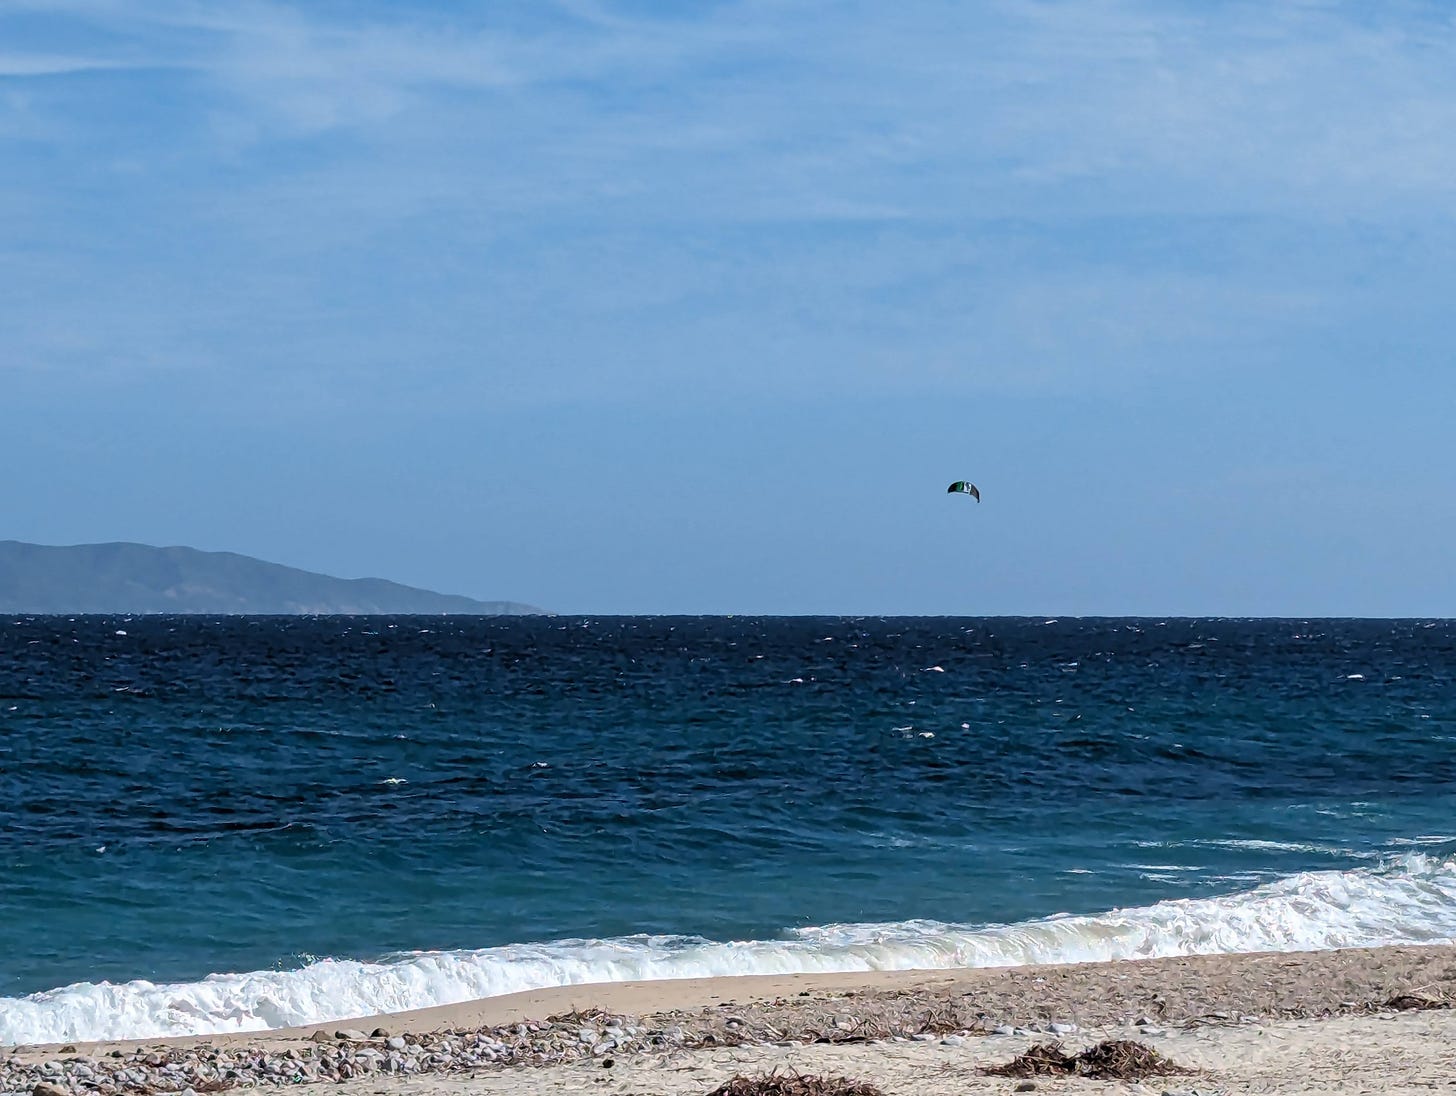 Kitesurfer from a distance on the blue water